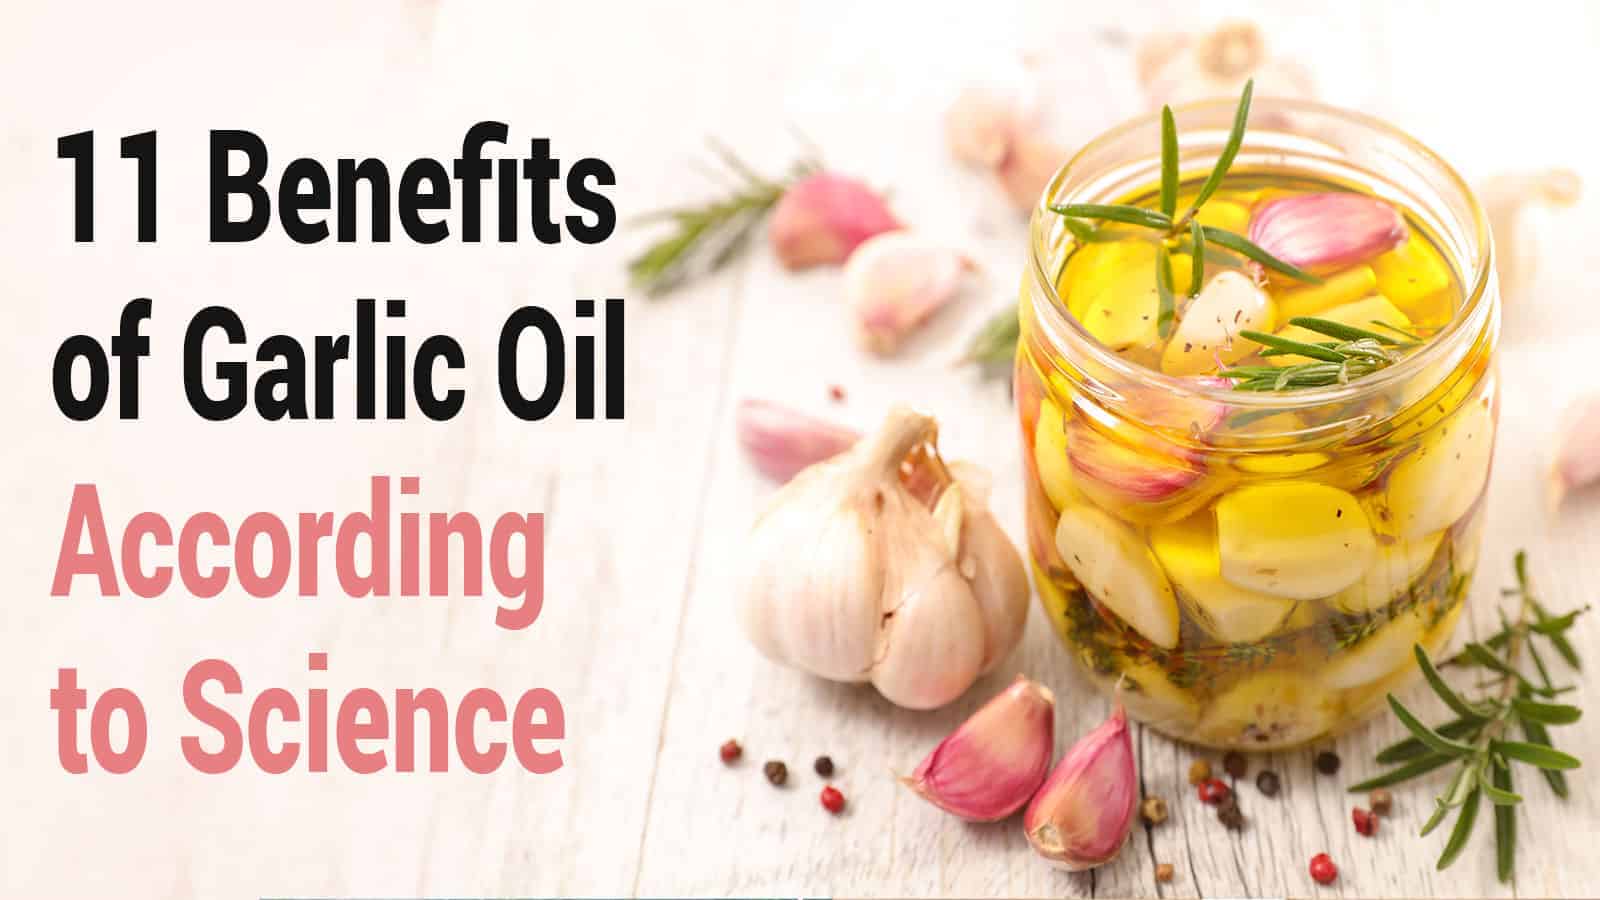 11 Benefits of Garlic Oil, According to Science